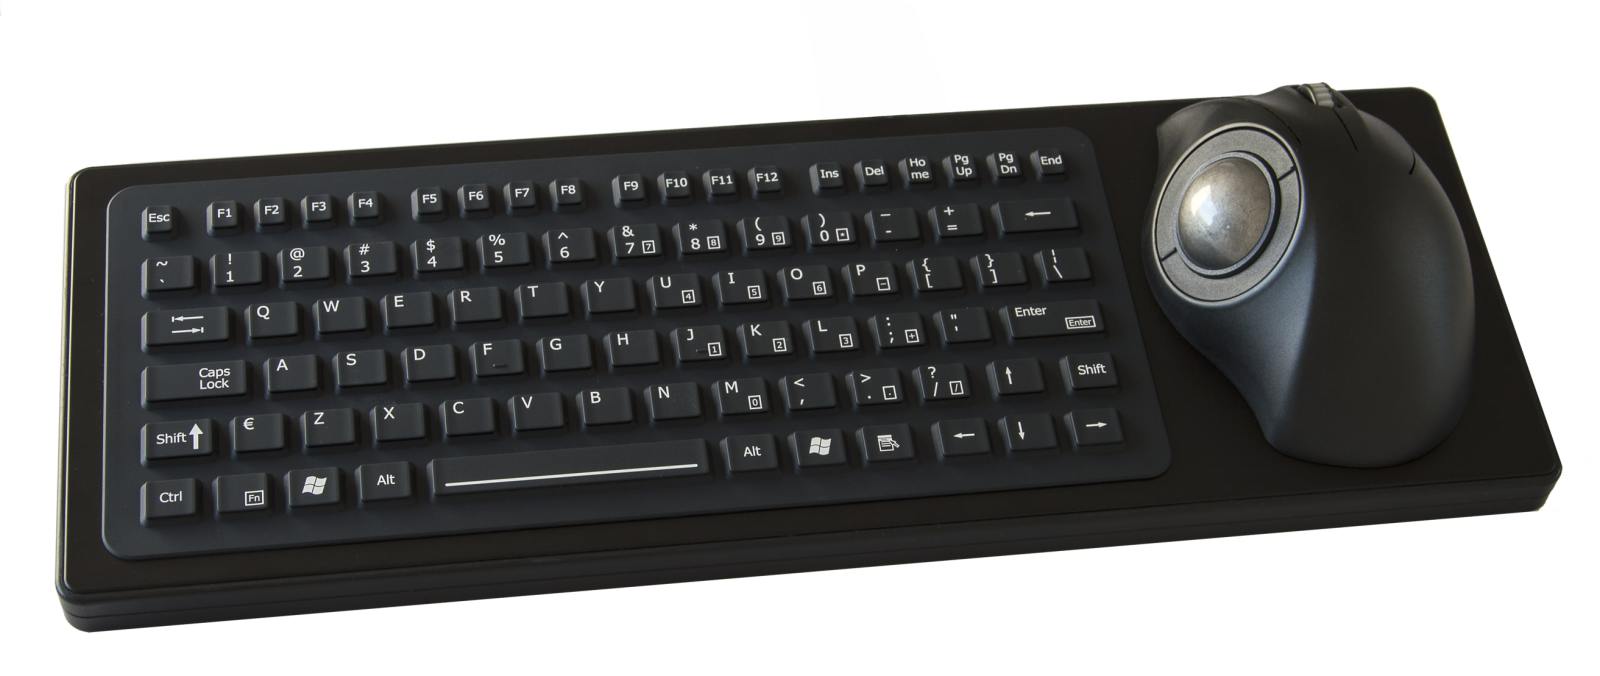 Trouwens campus Afzonderlijk Compact silicone rubber keyboard with ergonomic trackball | NSI